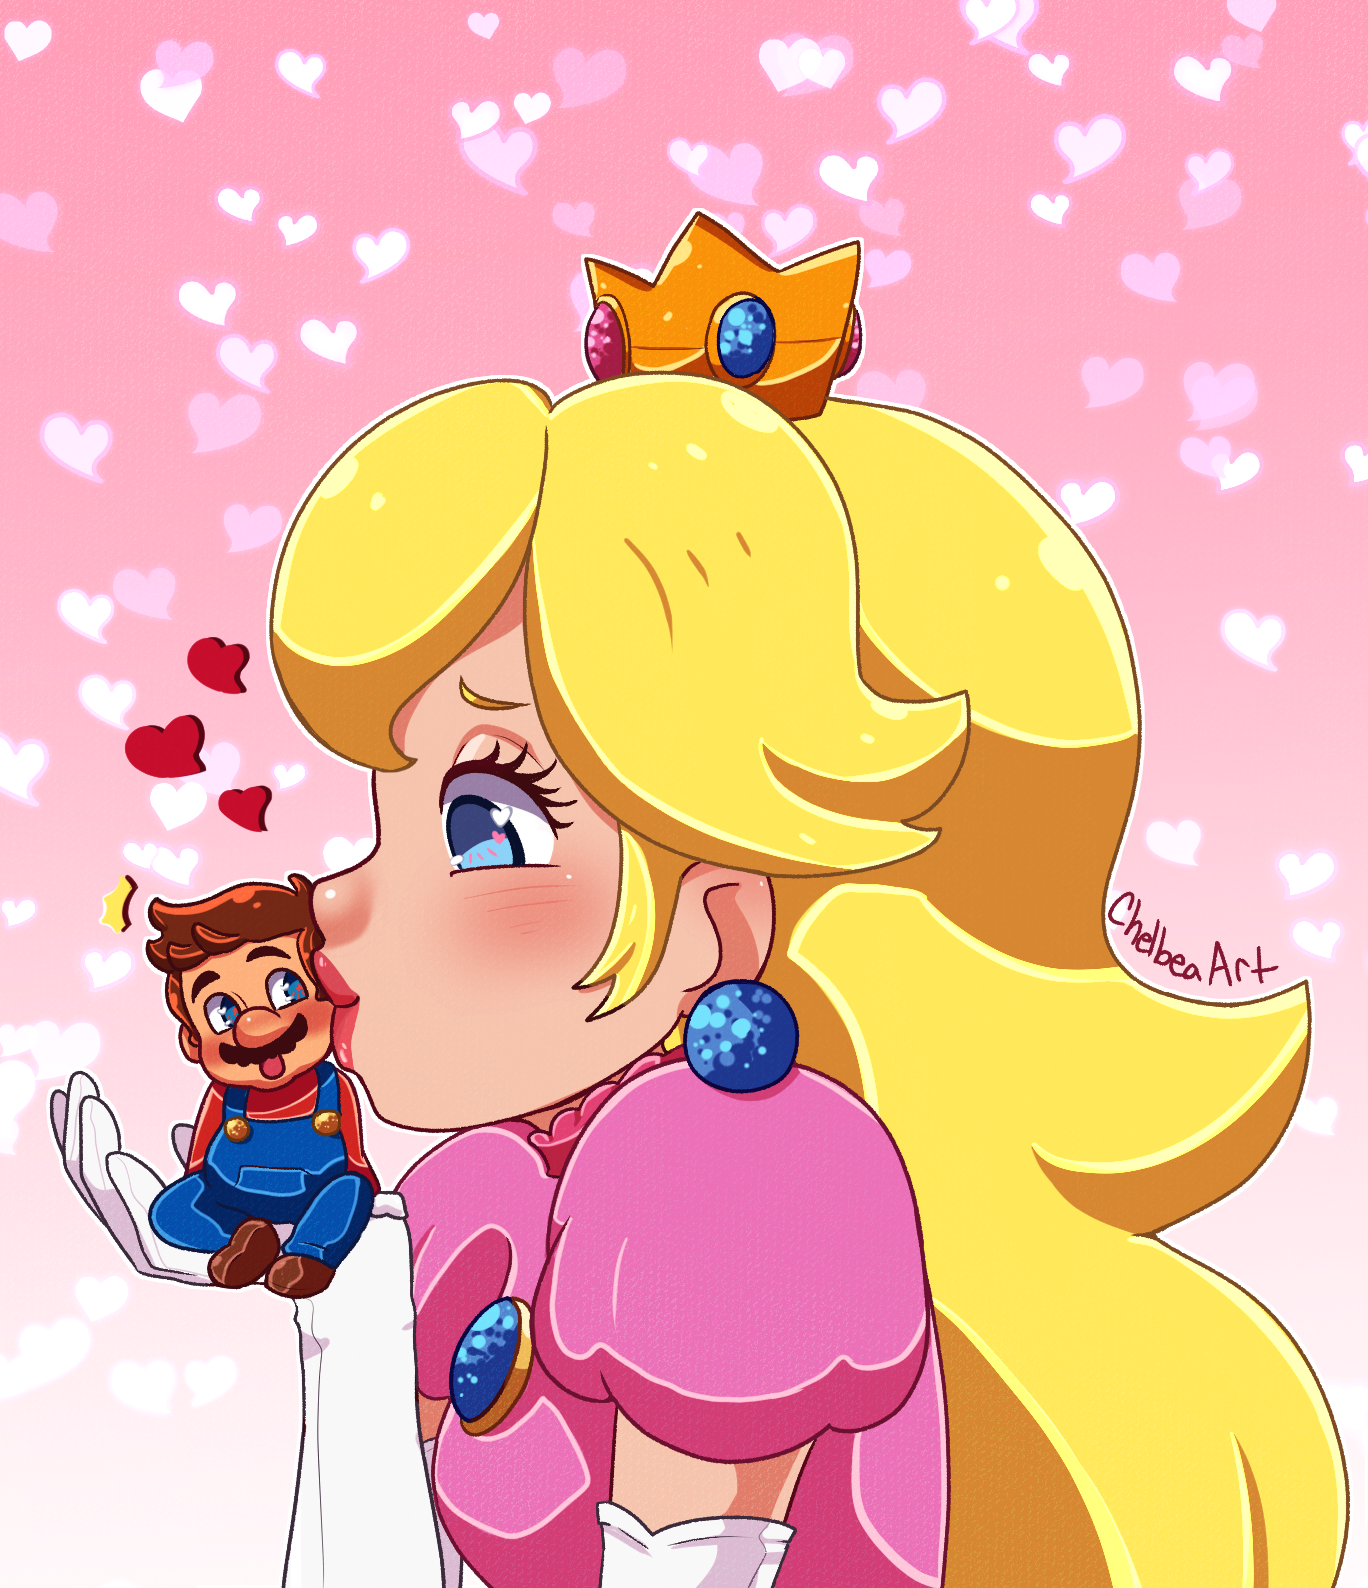 Peach And Small Mario by ChelbeaArt on DeviantArt